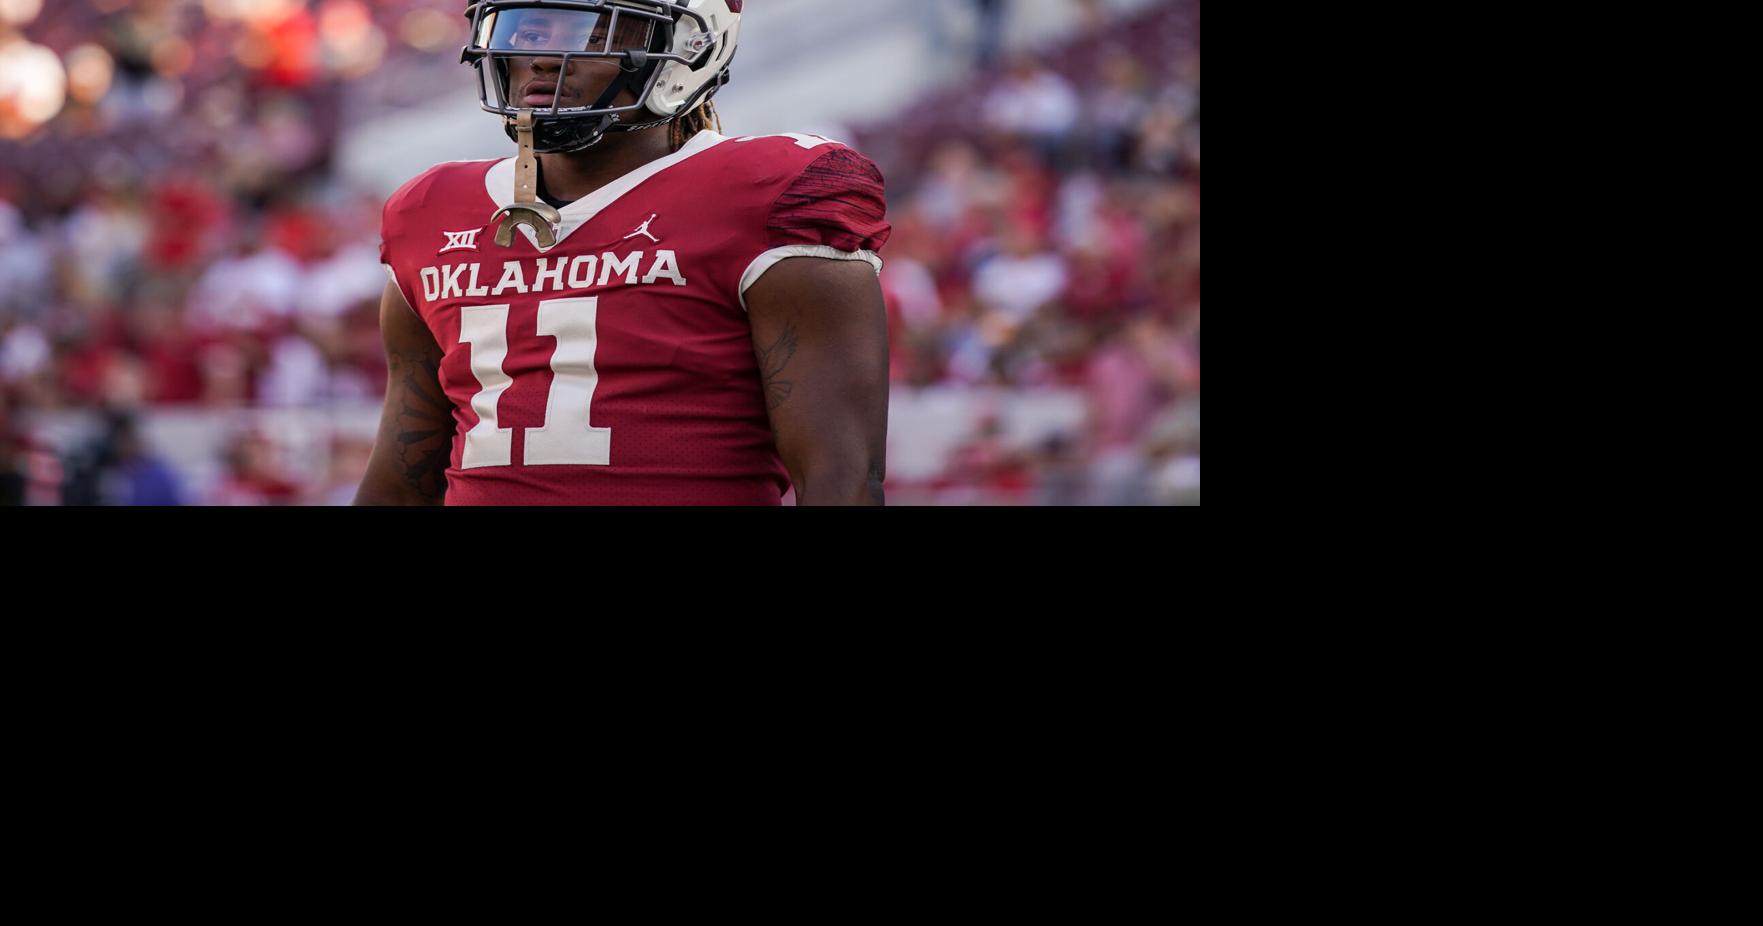 Oklahoma Football - With the 64th pick in the 2022 NFL Draft, the